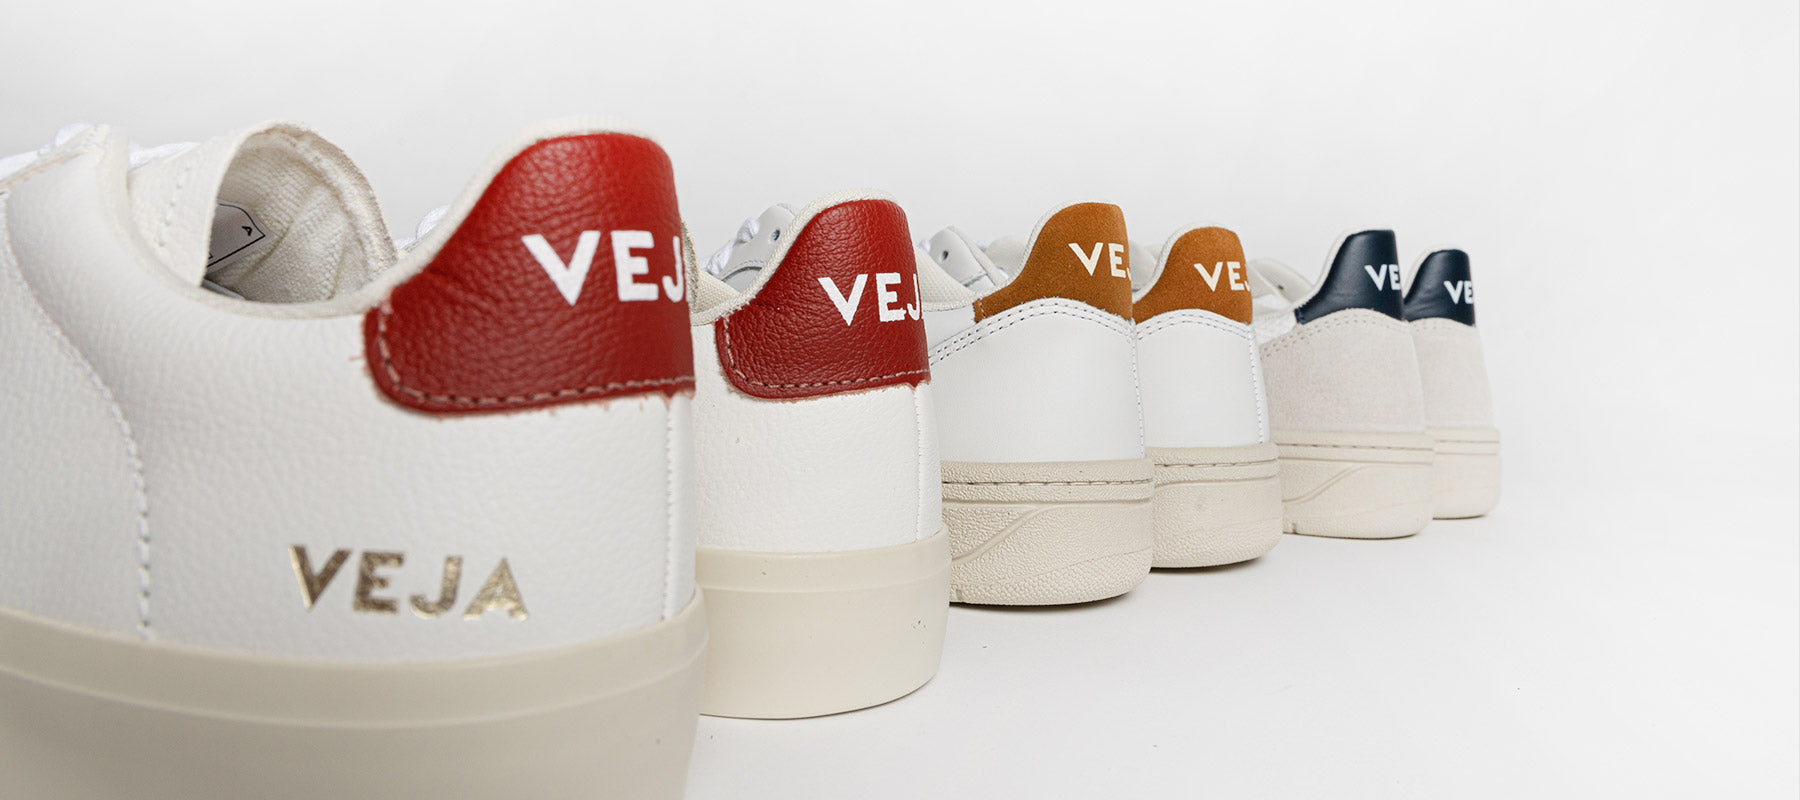 veja sneakers shoes collection